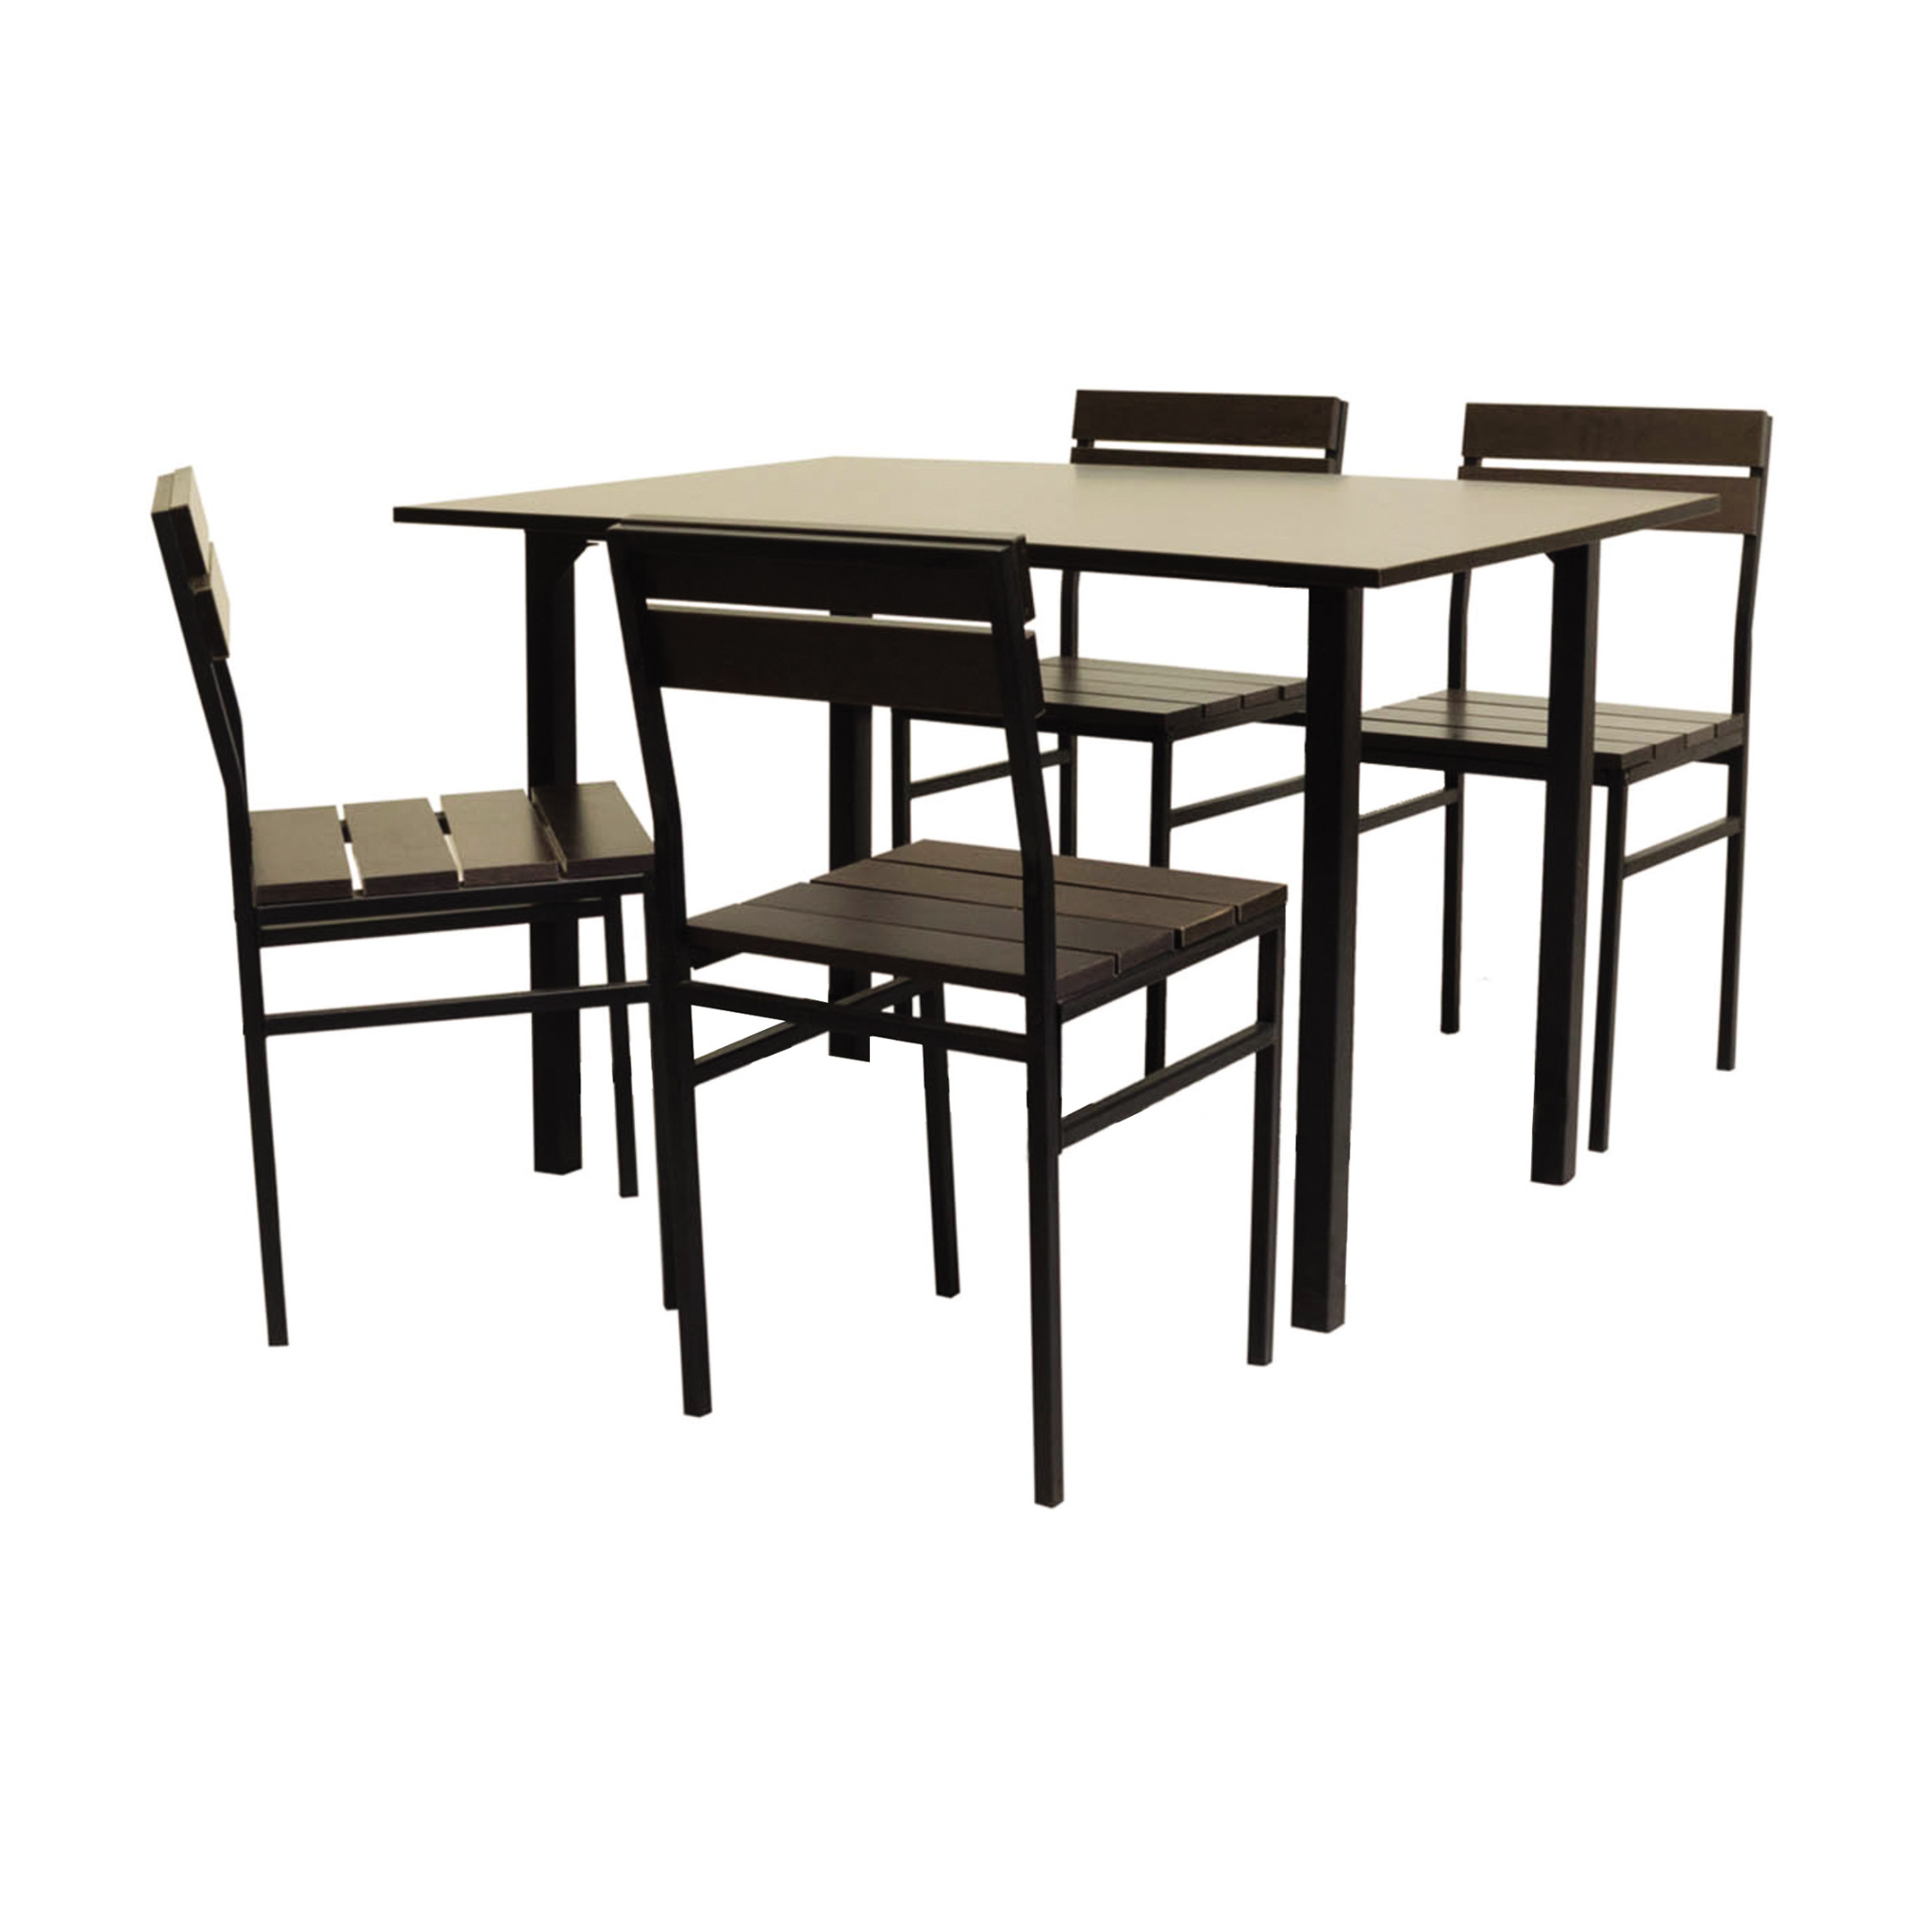 Polaris Metal Frame Wood Dining Table with 4 Seater Chair